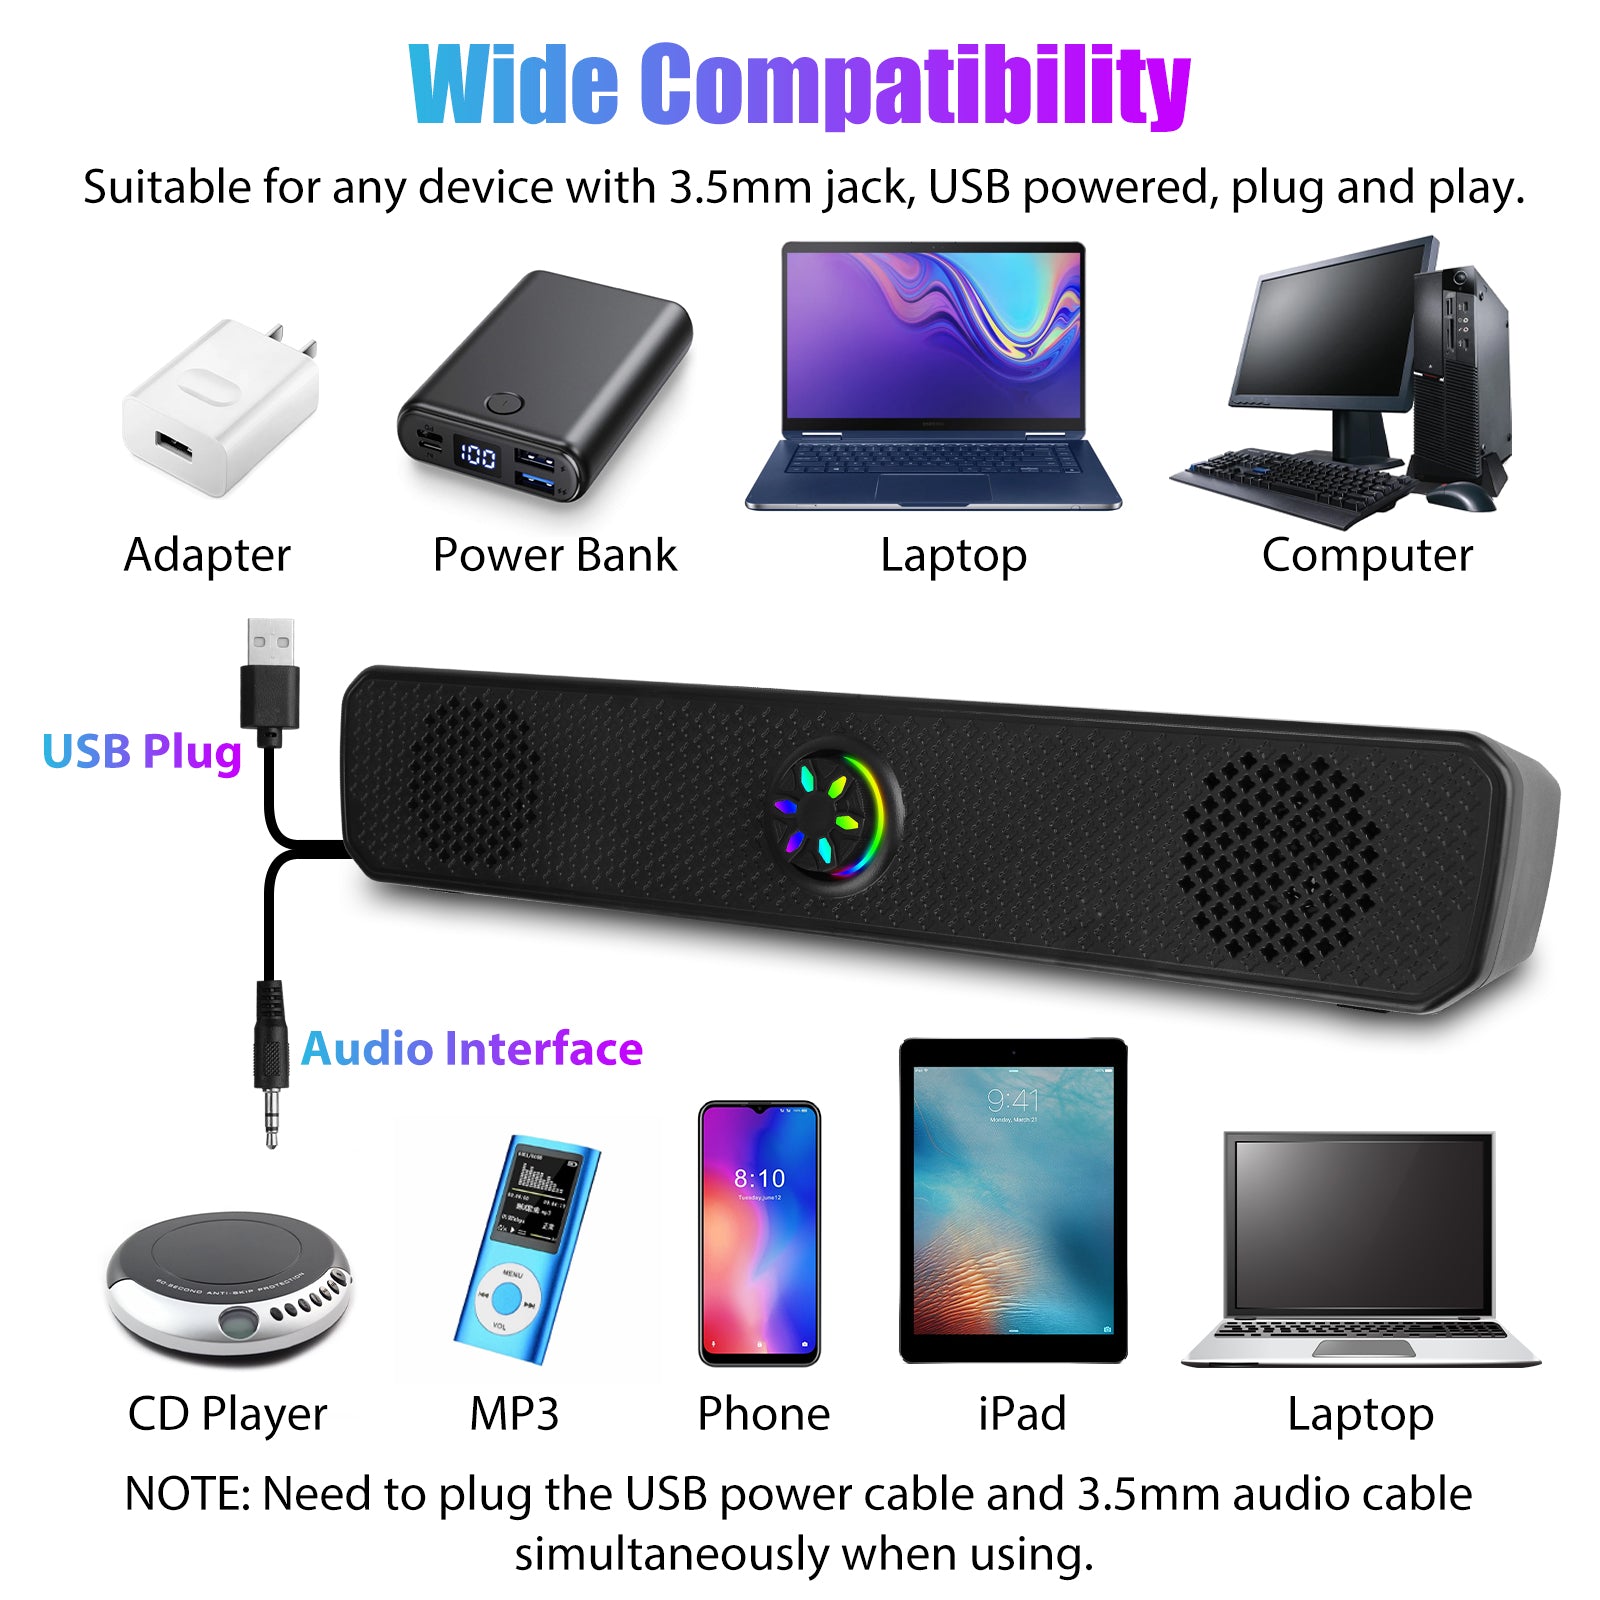 3.5mm Computer Speaker RGB Sound Bar - 6W Wired Bass Audio - USB Powered for Gaming, Home, Outdoor Party Projector